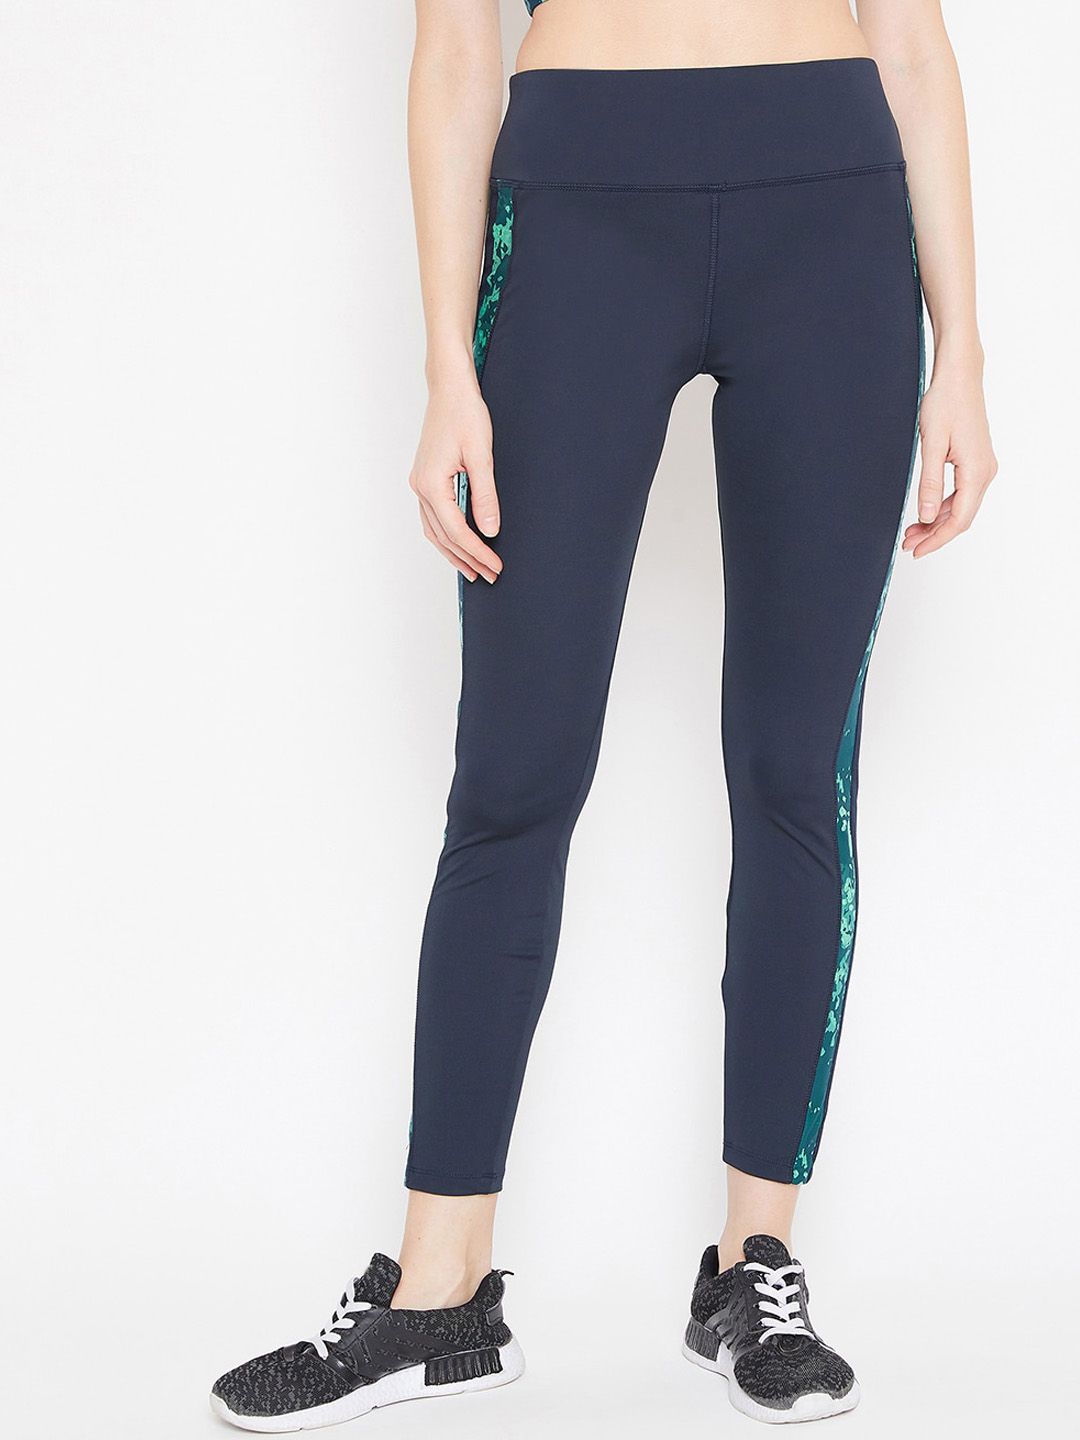 PERFKT-U Women Navy Blue Solid Skinny-Fit Tights Price in India